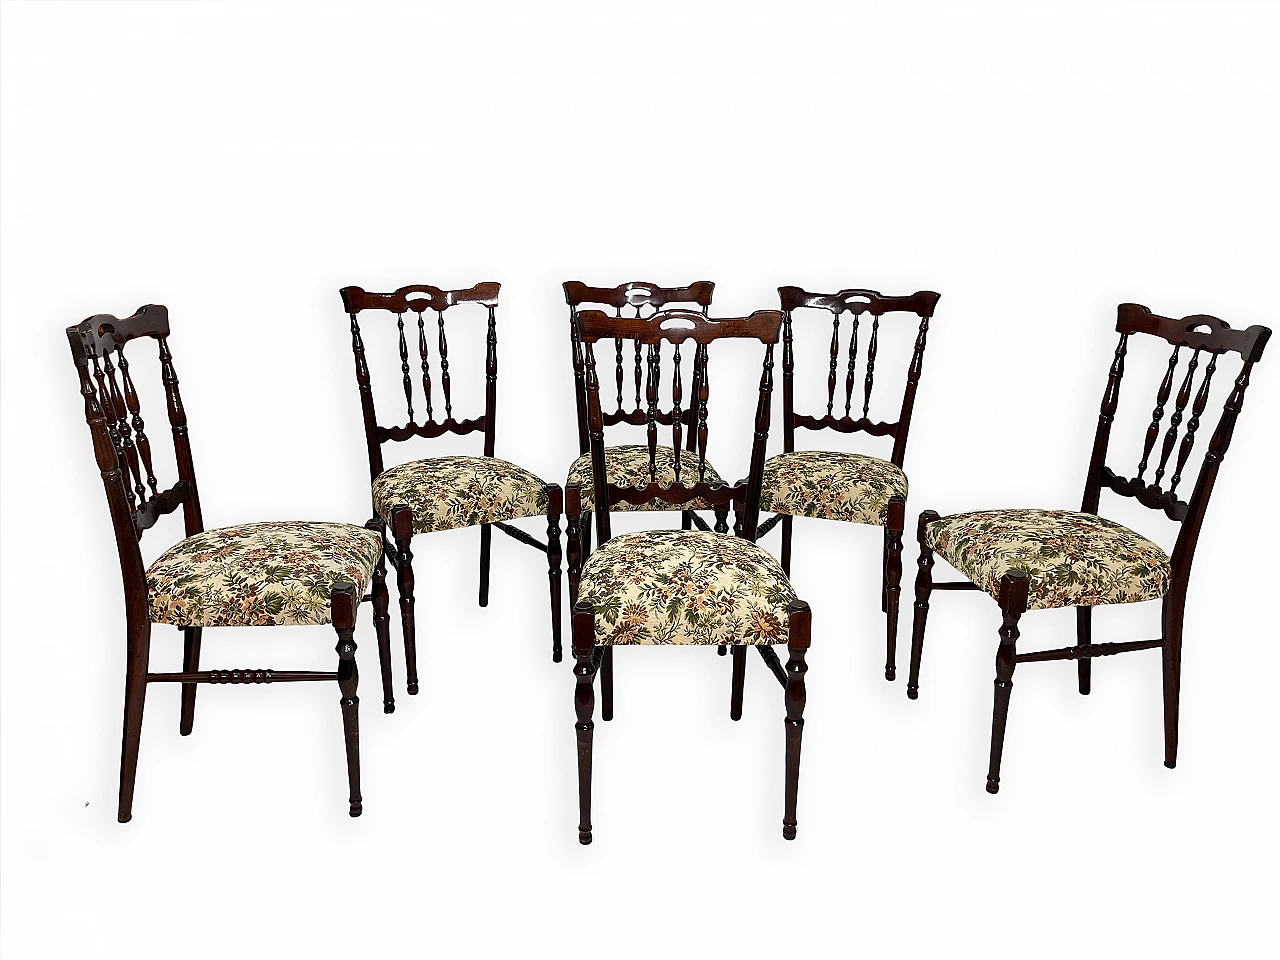 6 Wooden chairs, 1940s 2